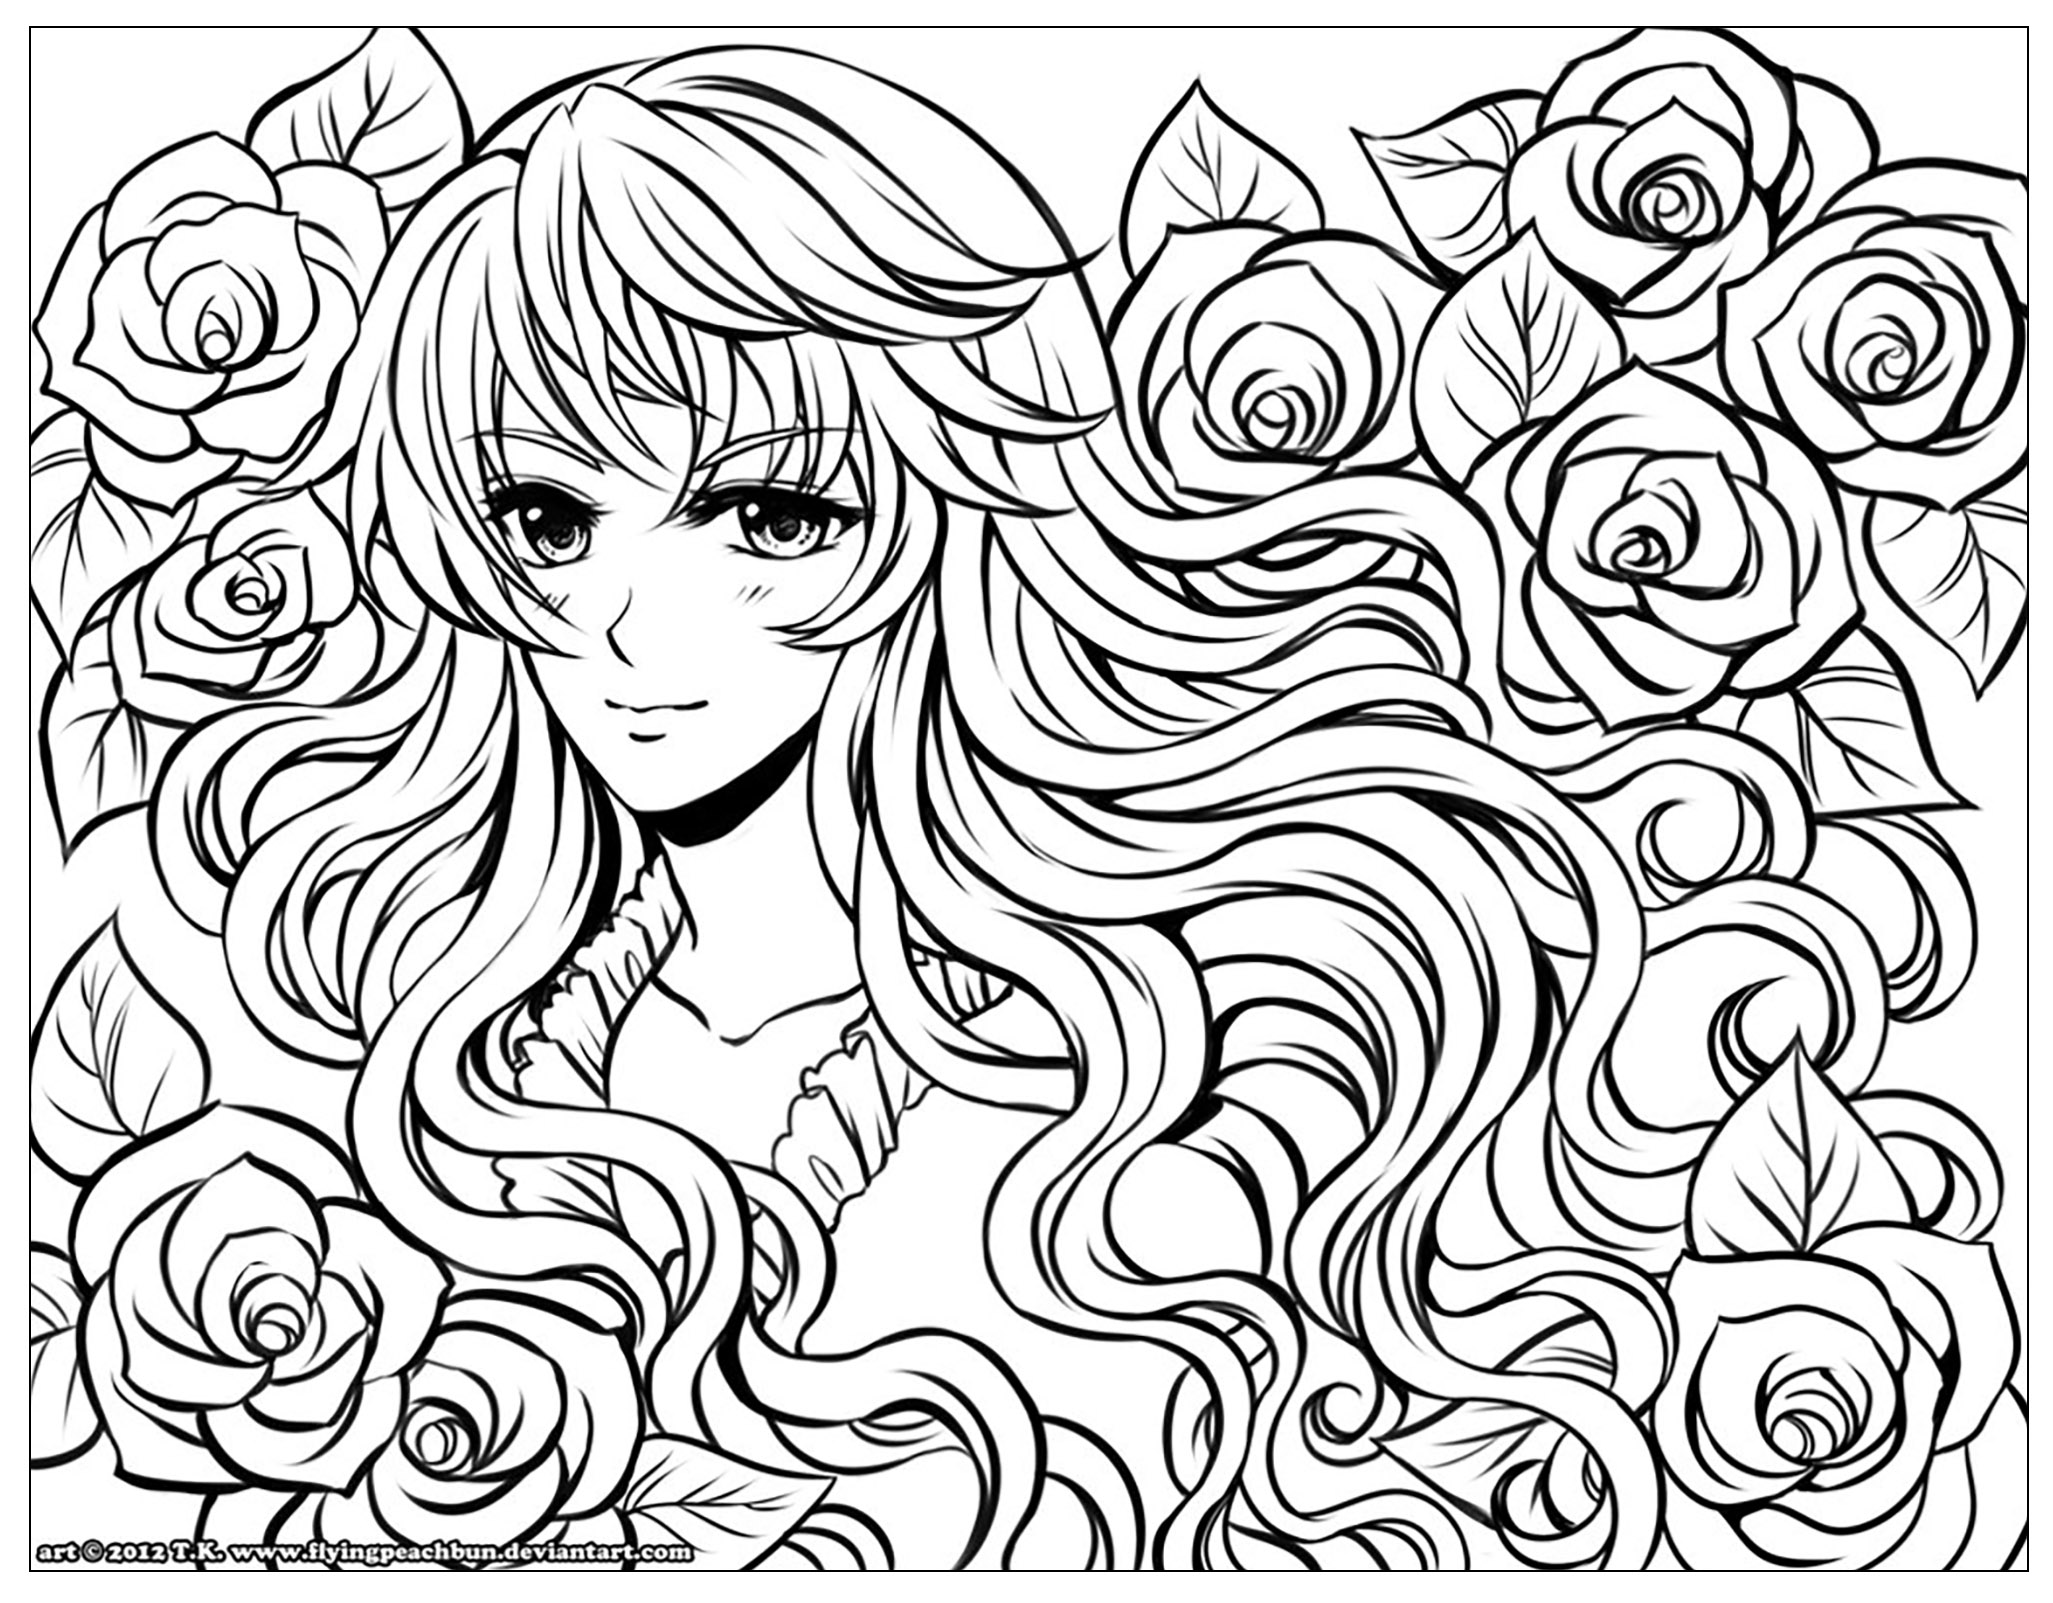 Manga girl with flowers - Manga / Anime Adult Coloring Pages